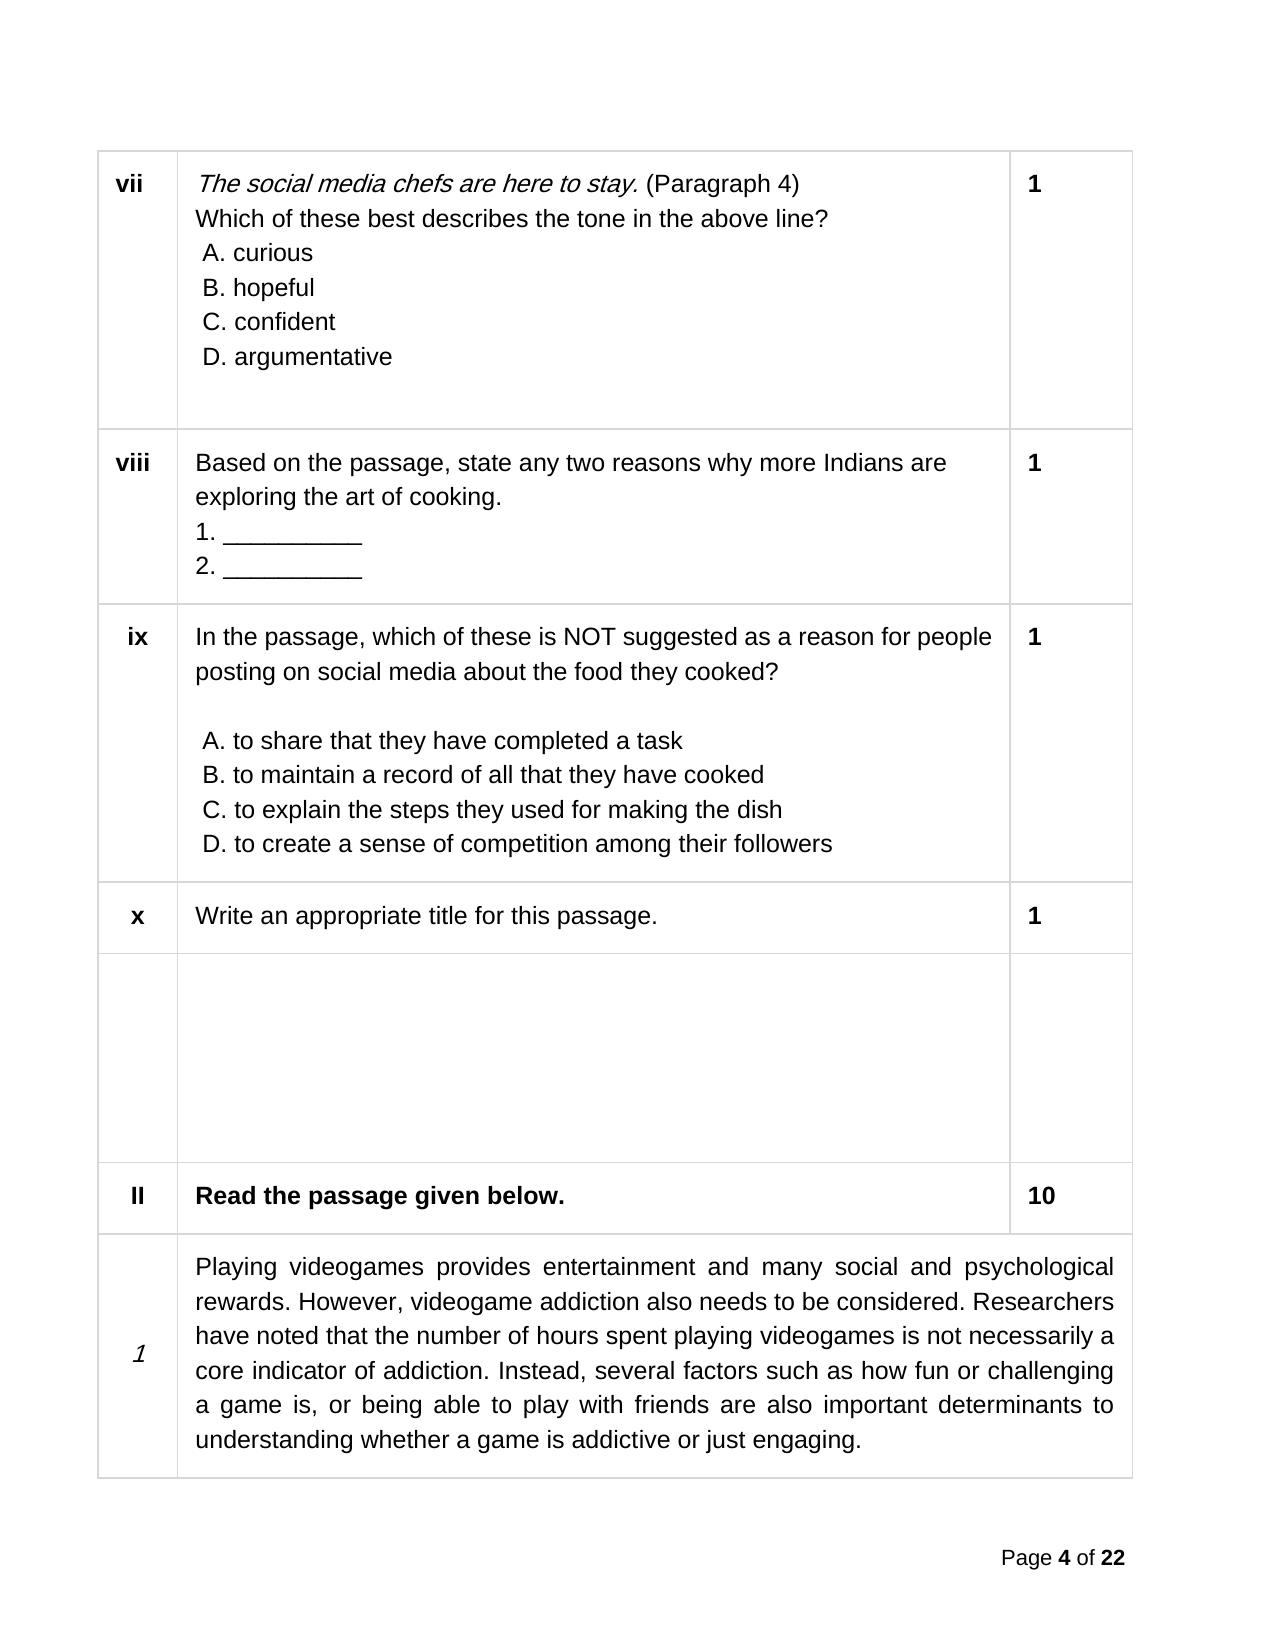 CBSE Class 10 English Practice Questions 2022-23 - Page 4